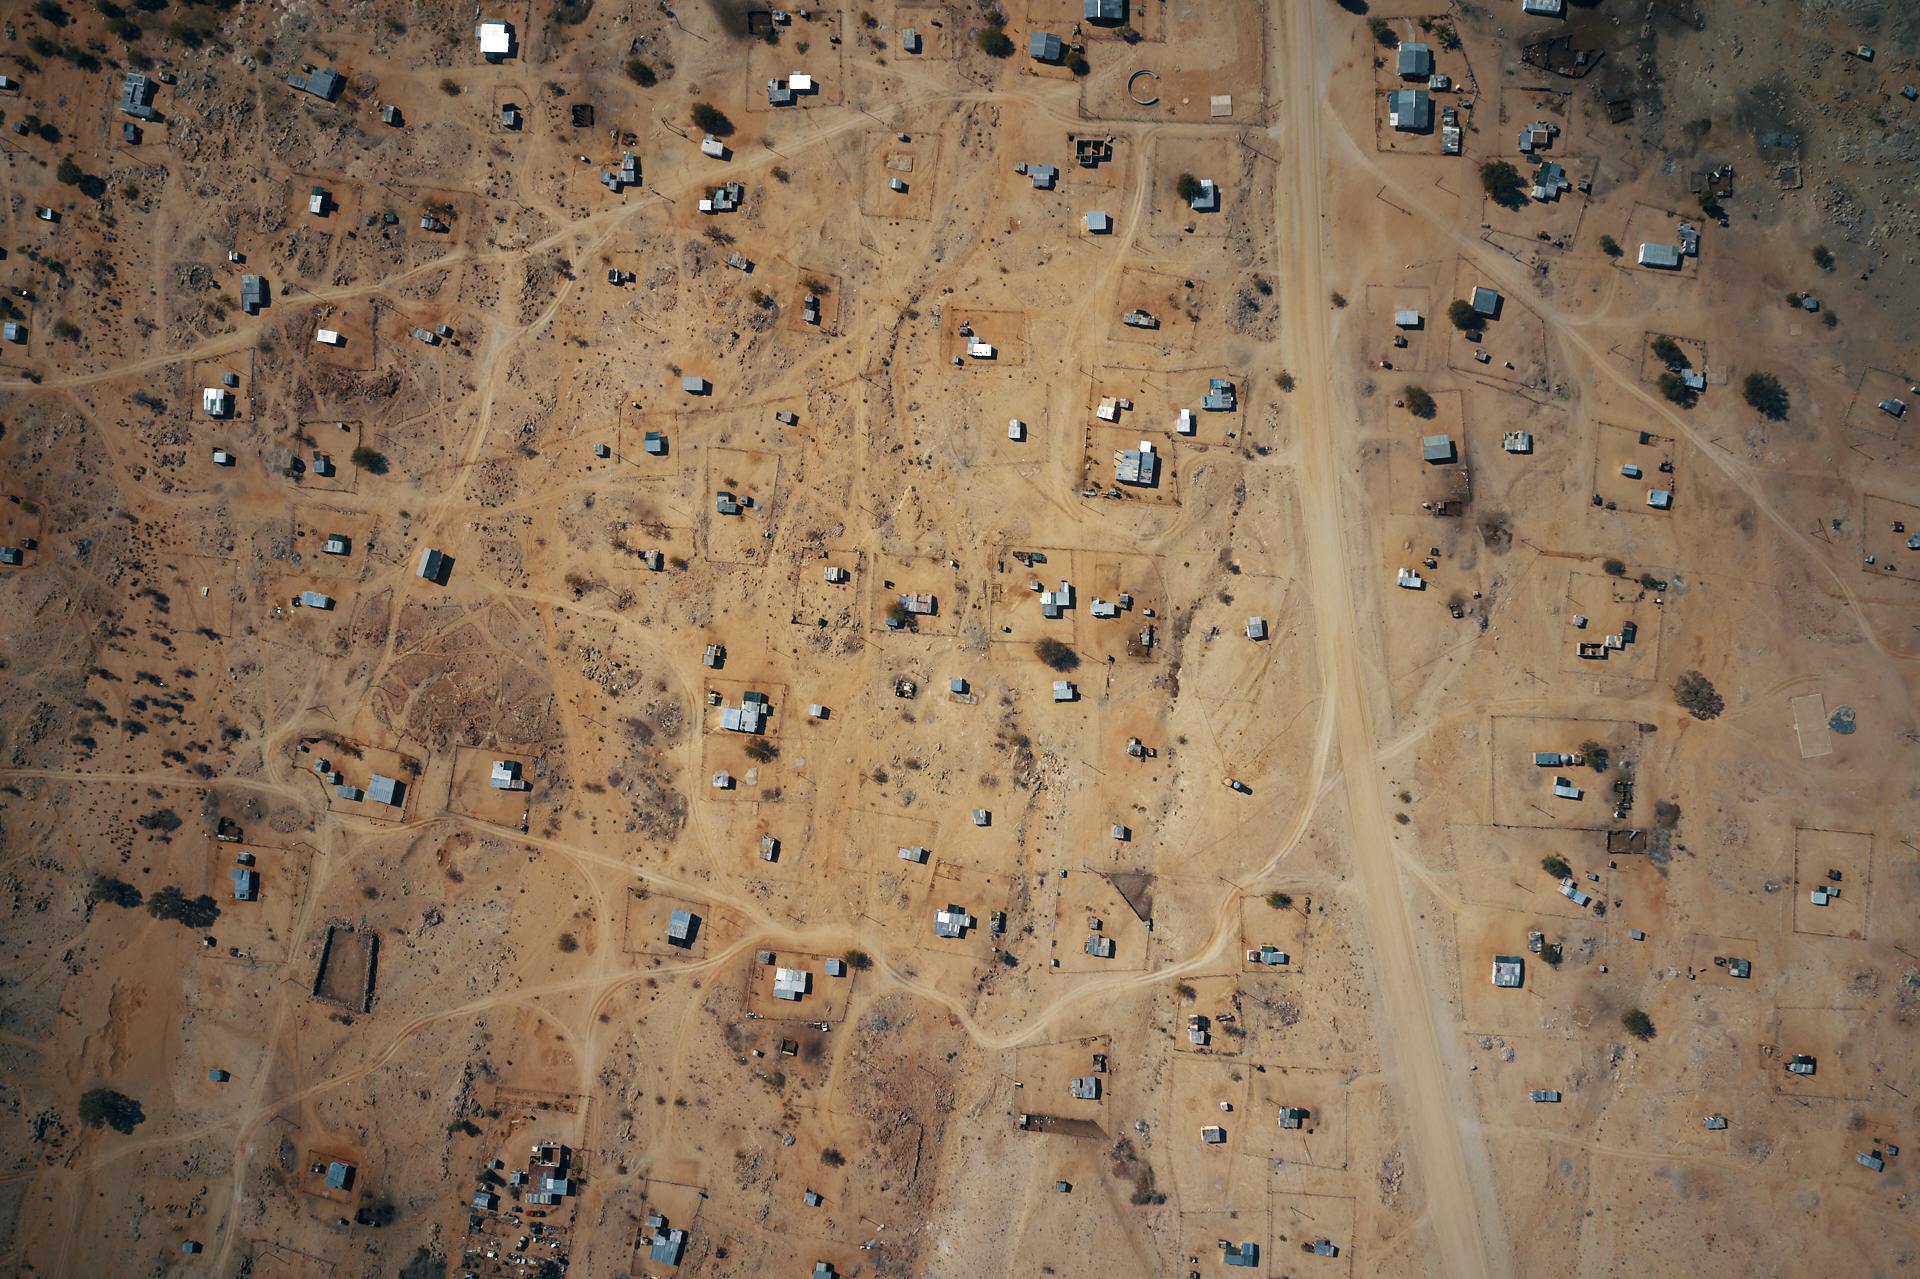 A drone image of scattered houses across the dry, sandy landscape